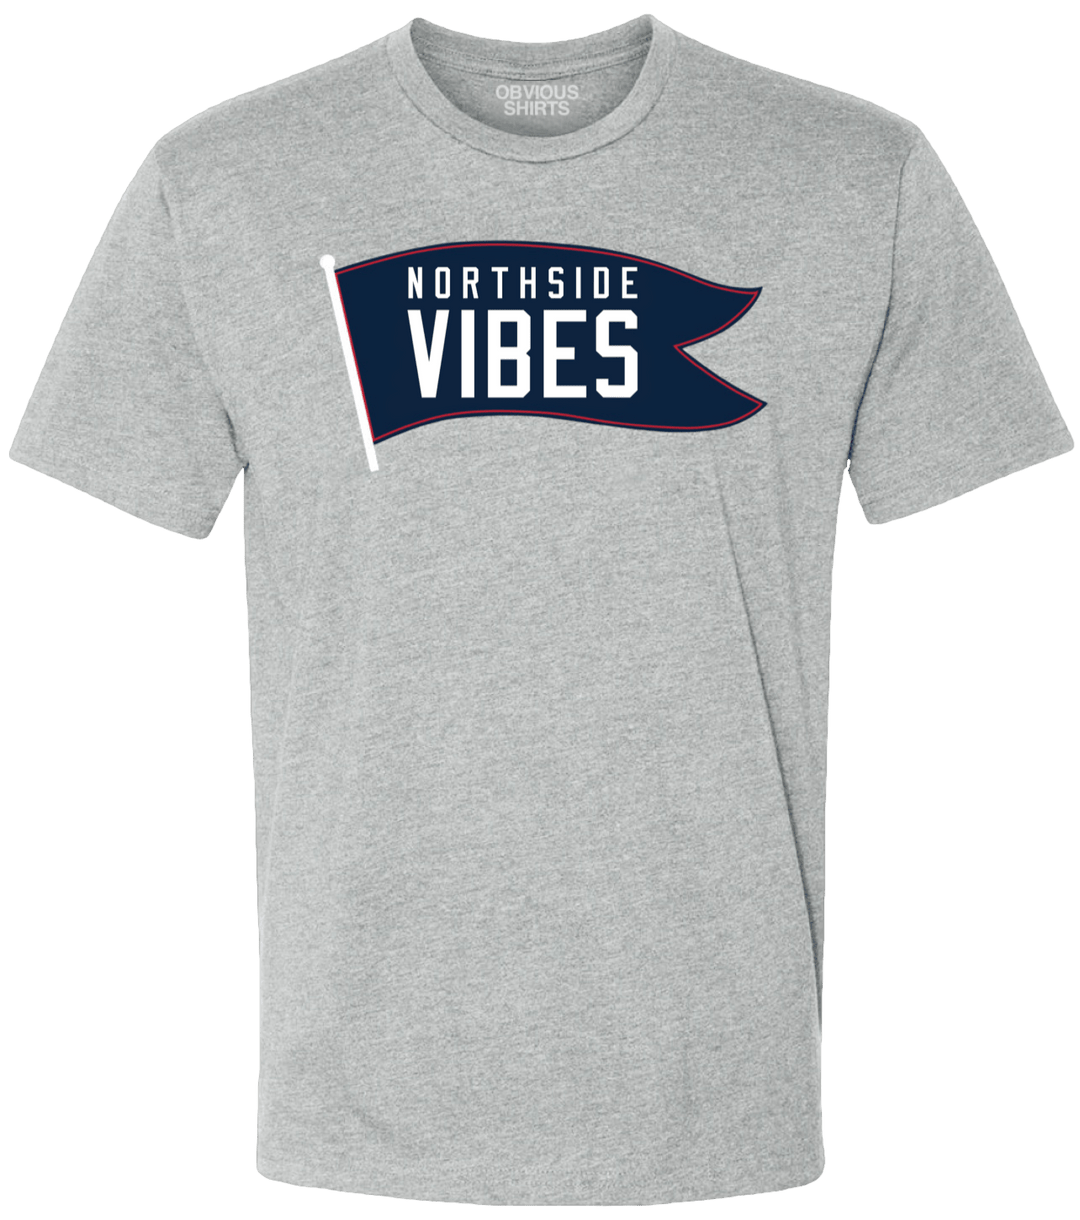 BEST SELLERS. – Tagged Cubs– OBVIOUS SHIRTS